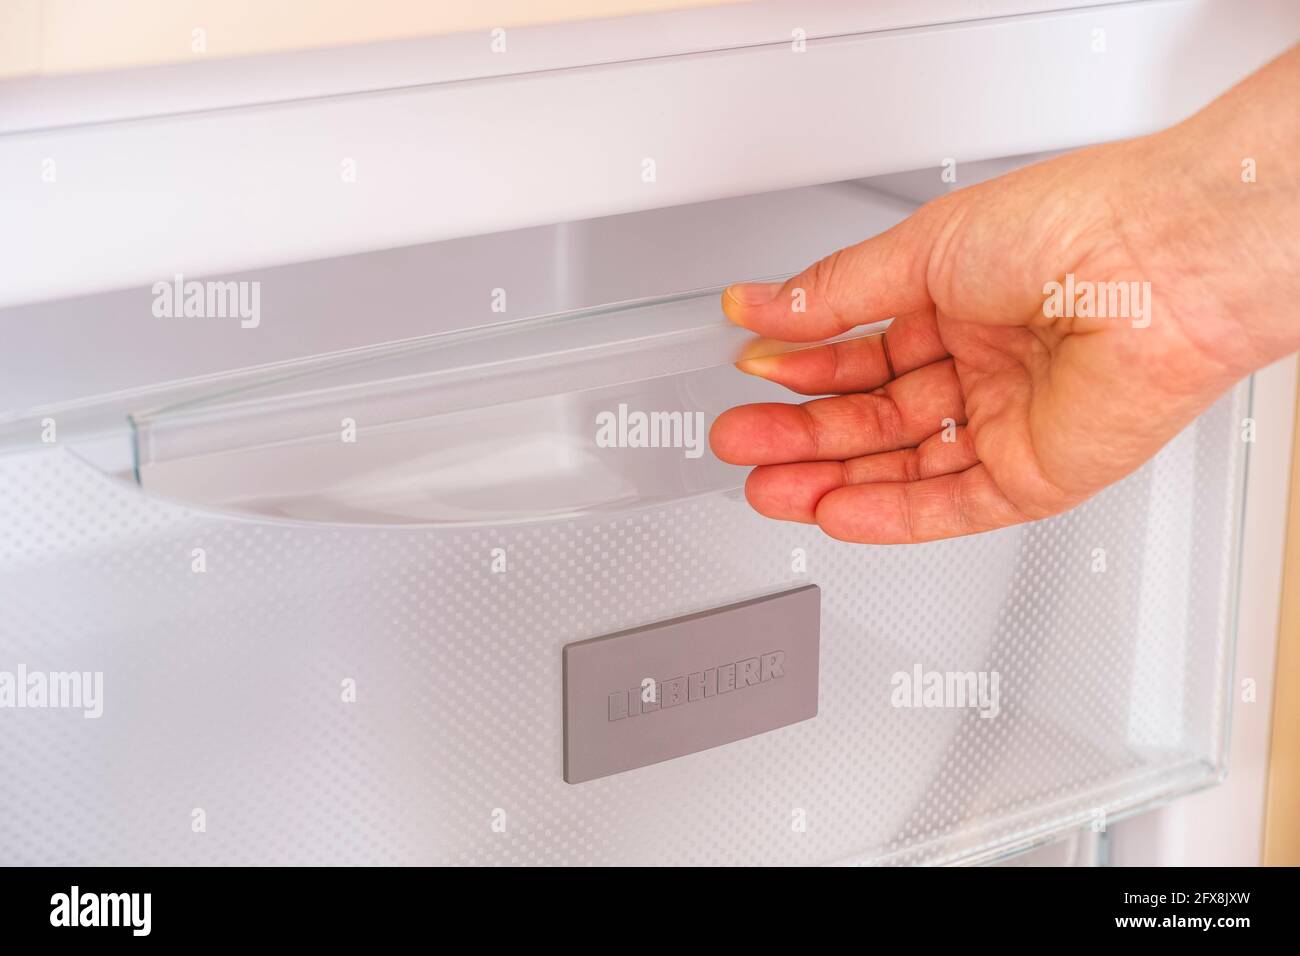 Tambov, Russian Federation - April 15, 2021 A woman's hand taking a compartment out of a Liebherr fridge. Stock Photo